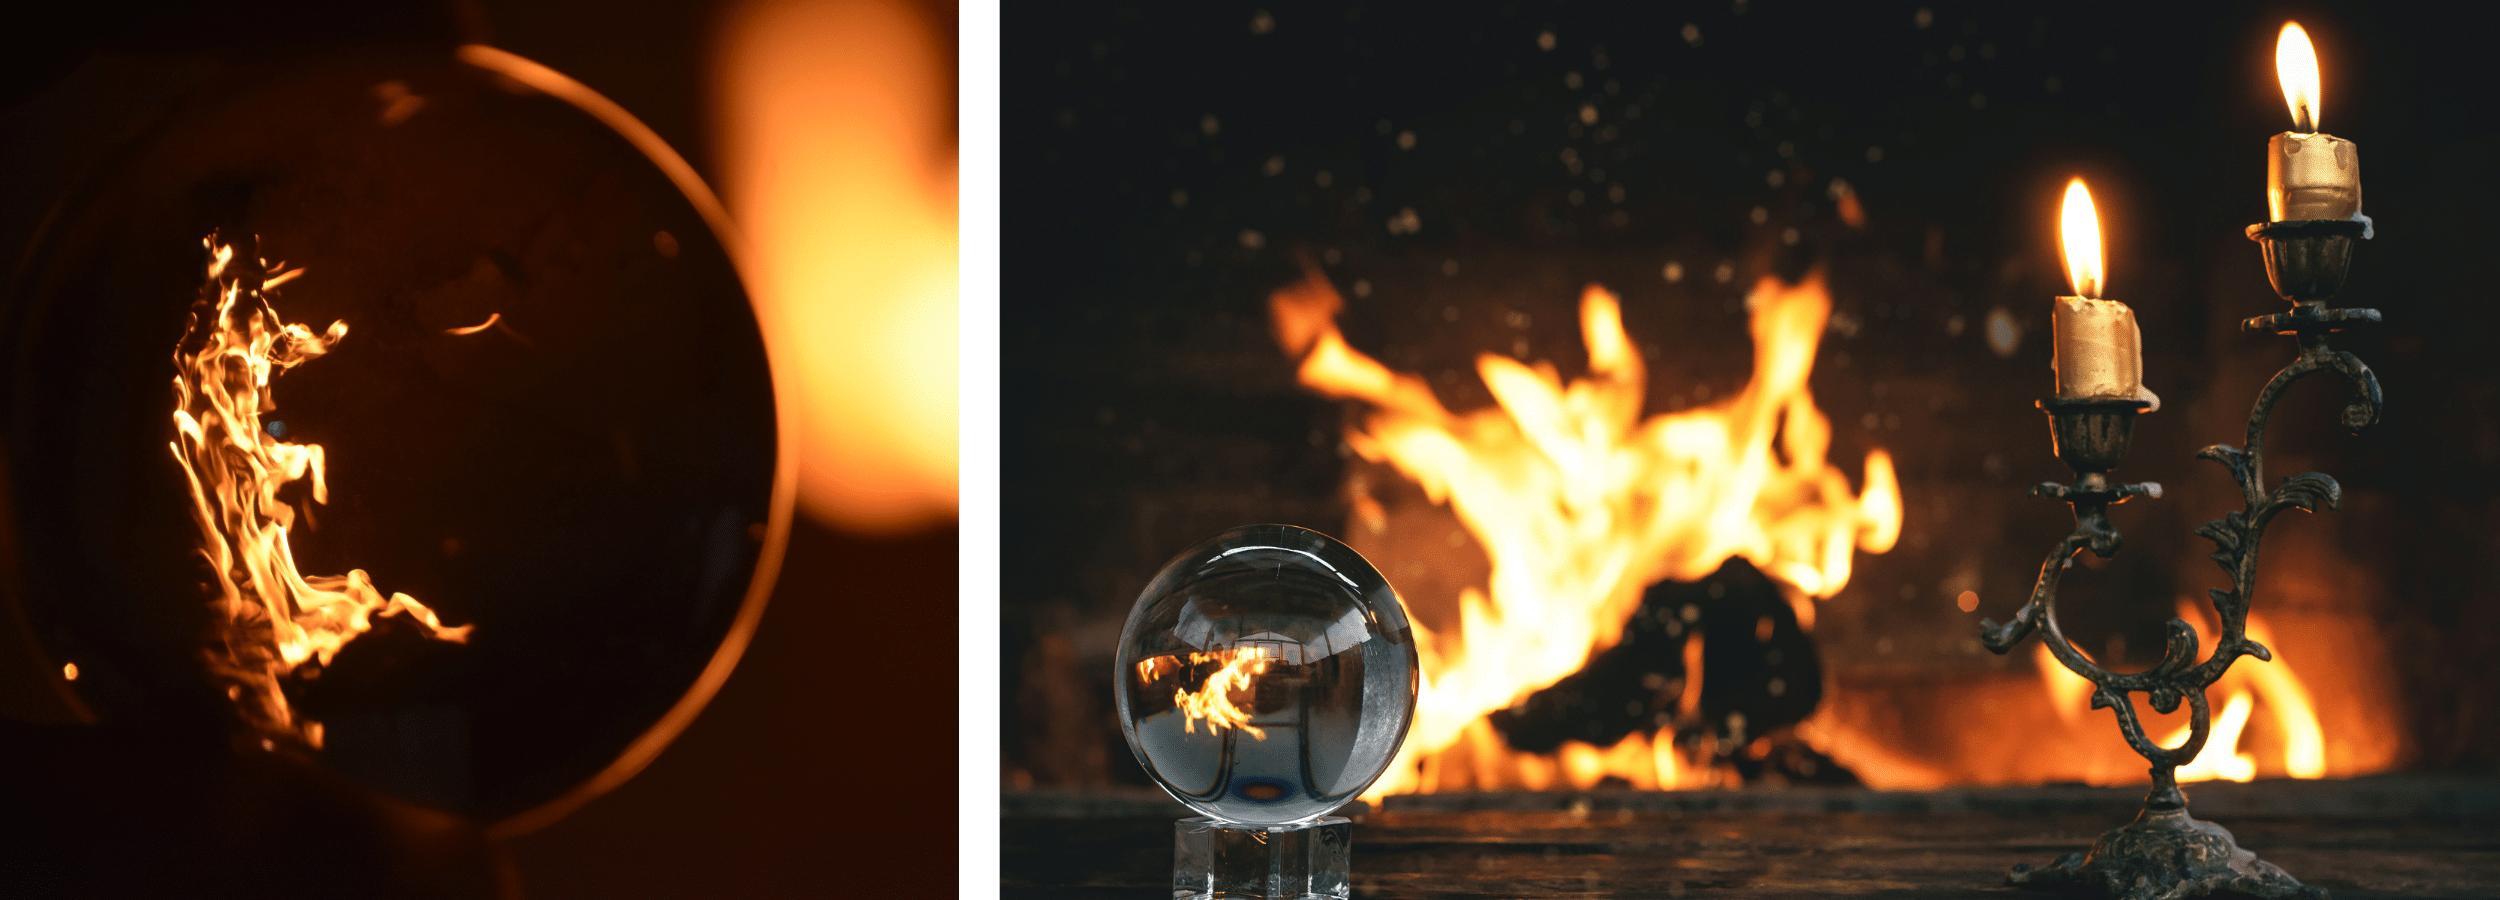 Scrying with fire and a crystal ball